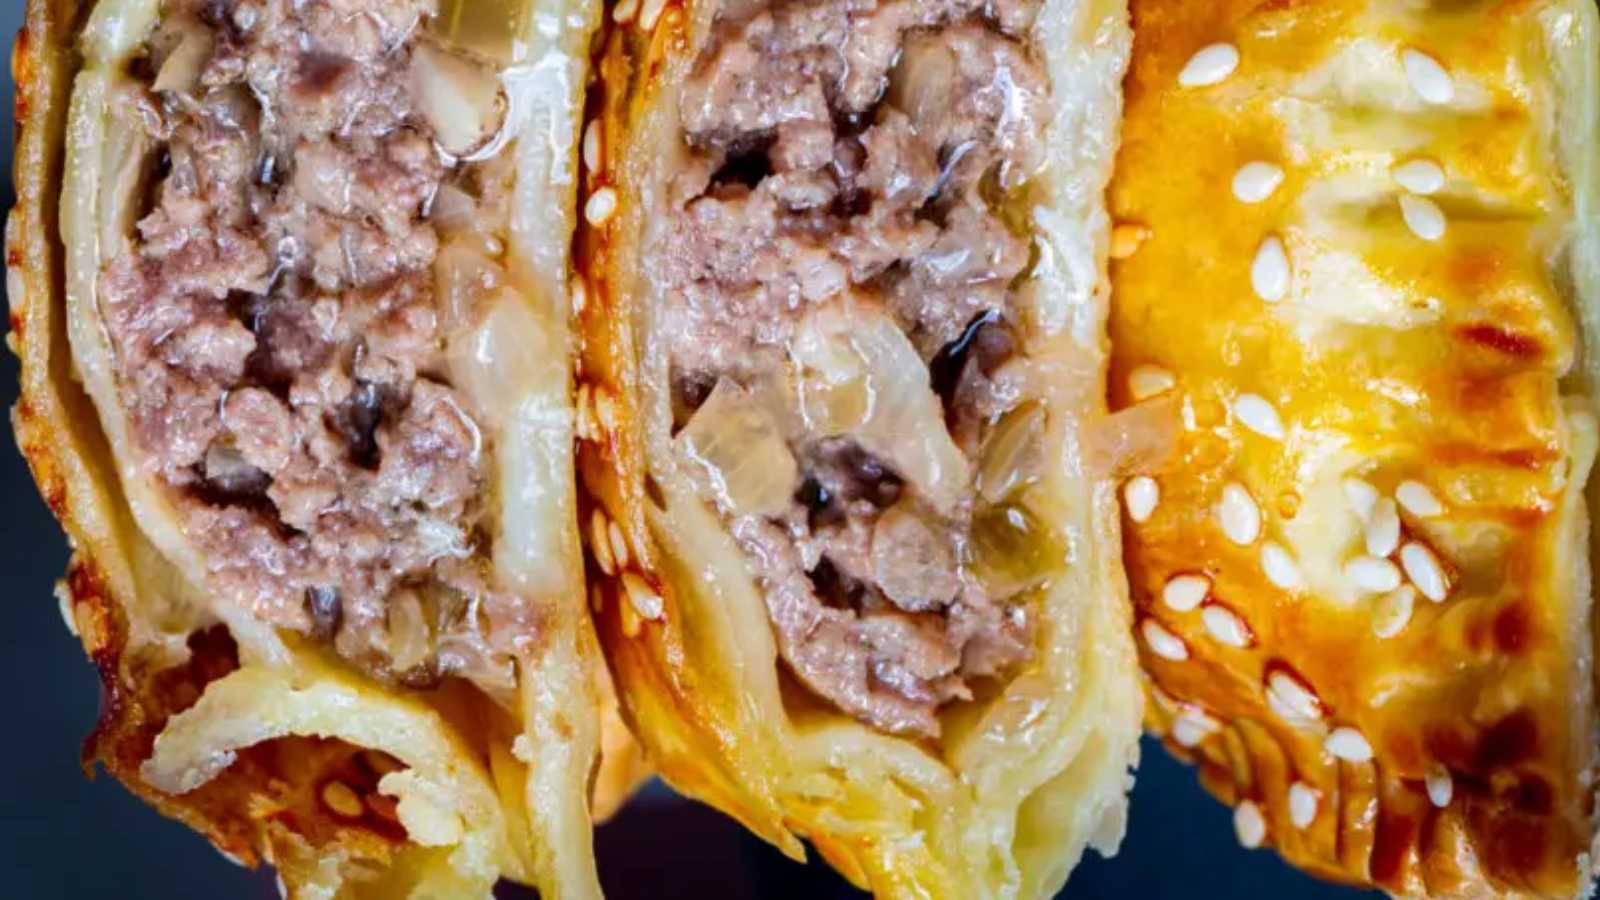 Mouthwatering stuffed pastry bursting with flavorful meat.